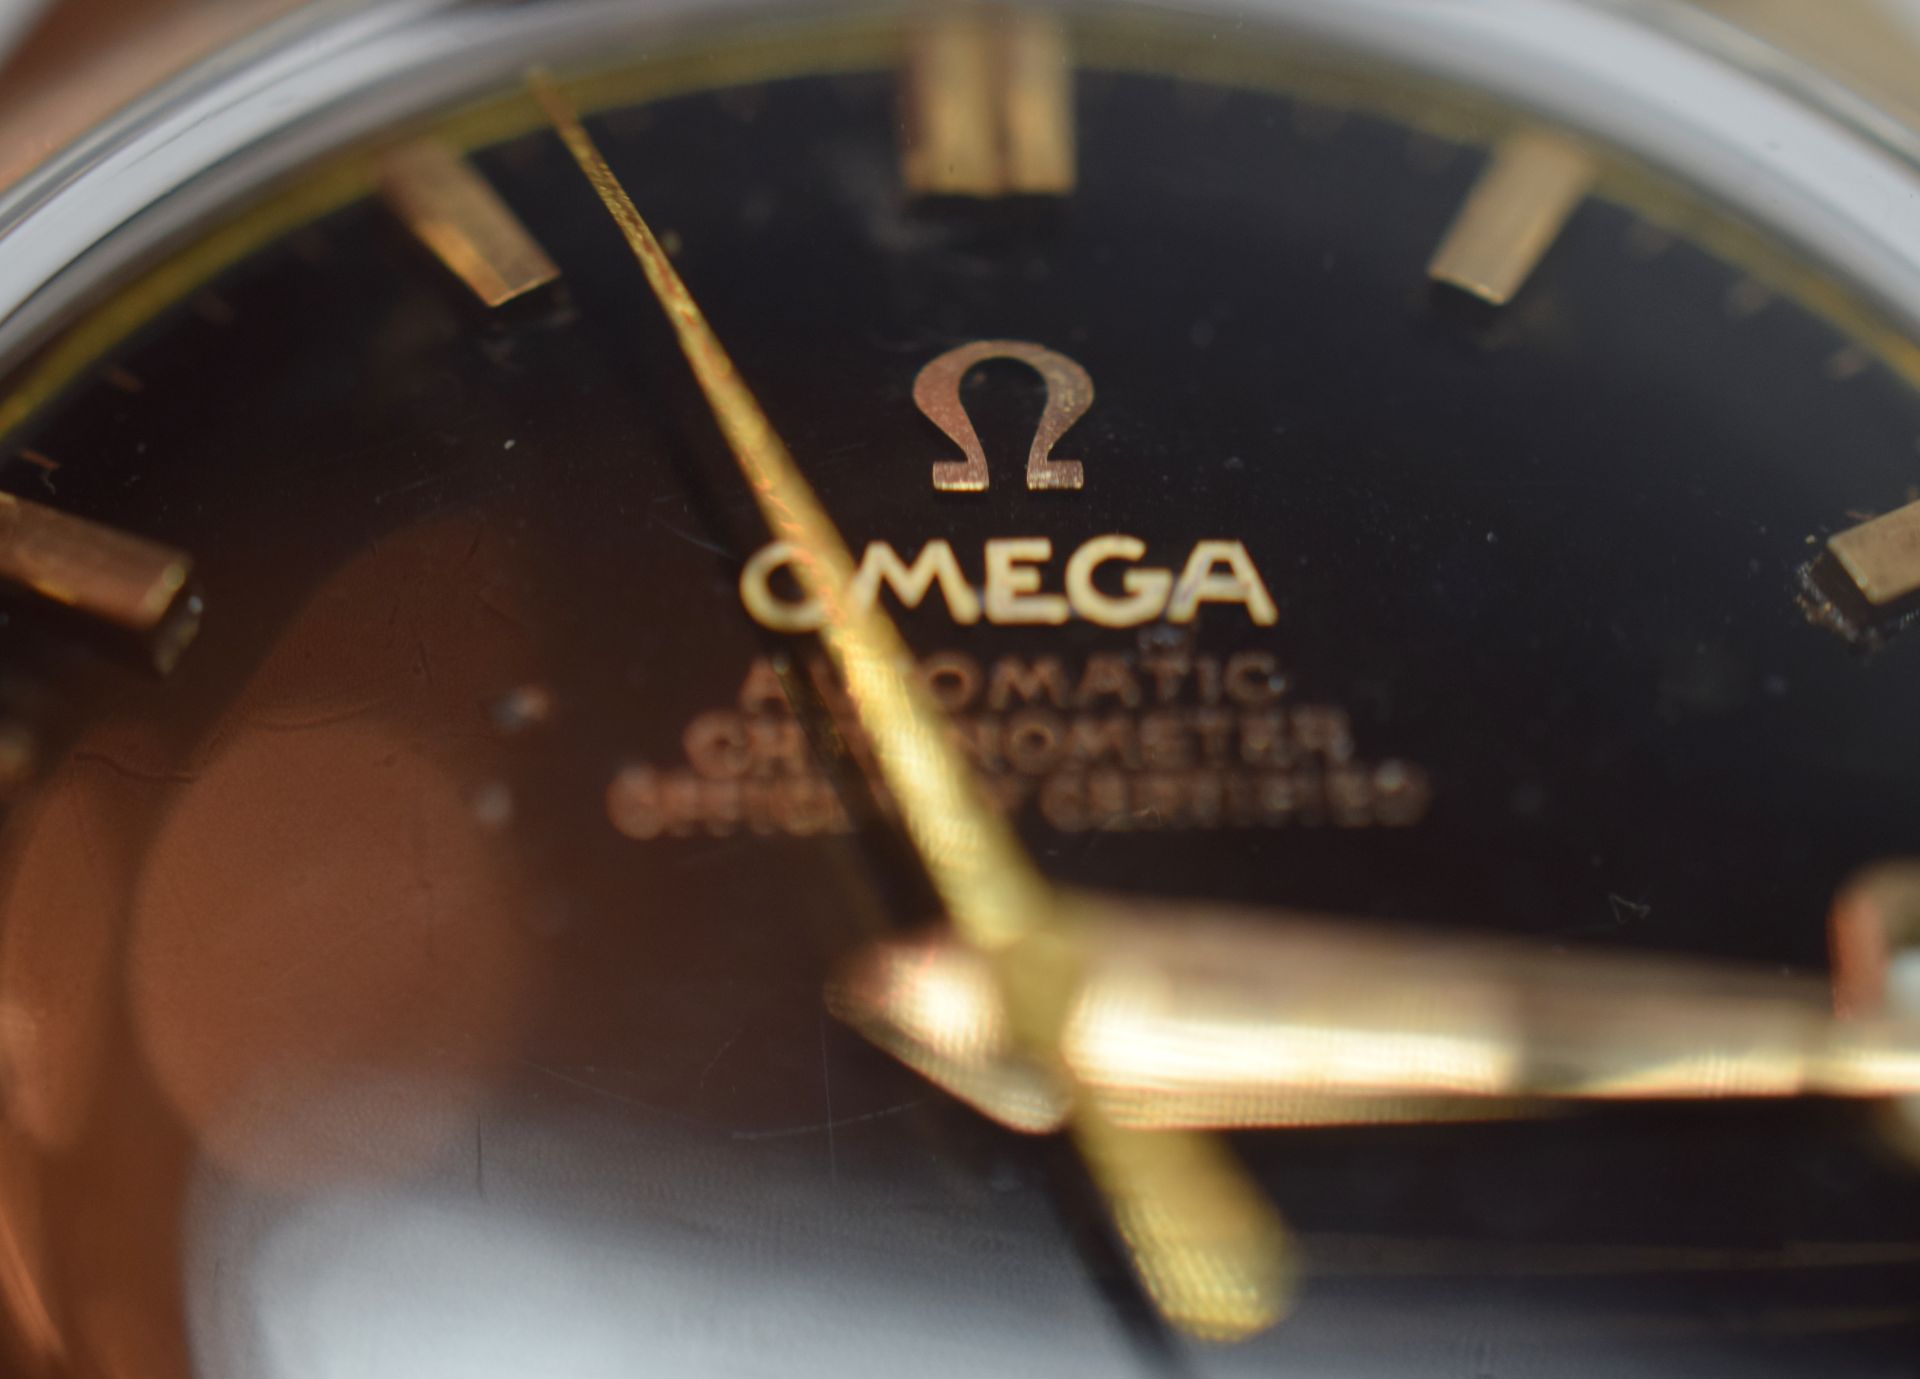 Omega Constellation Black Dial Gold Capped On Chrome c1960/70s ***Reserve Reduced*** - Image 8 of 8